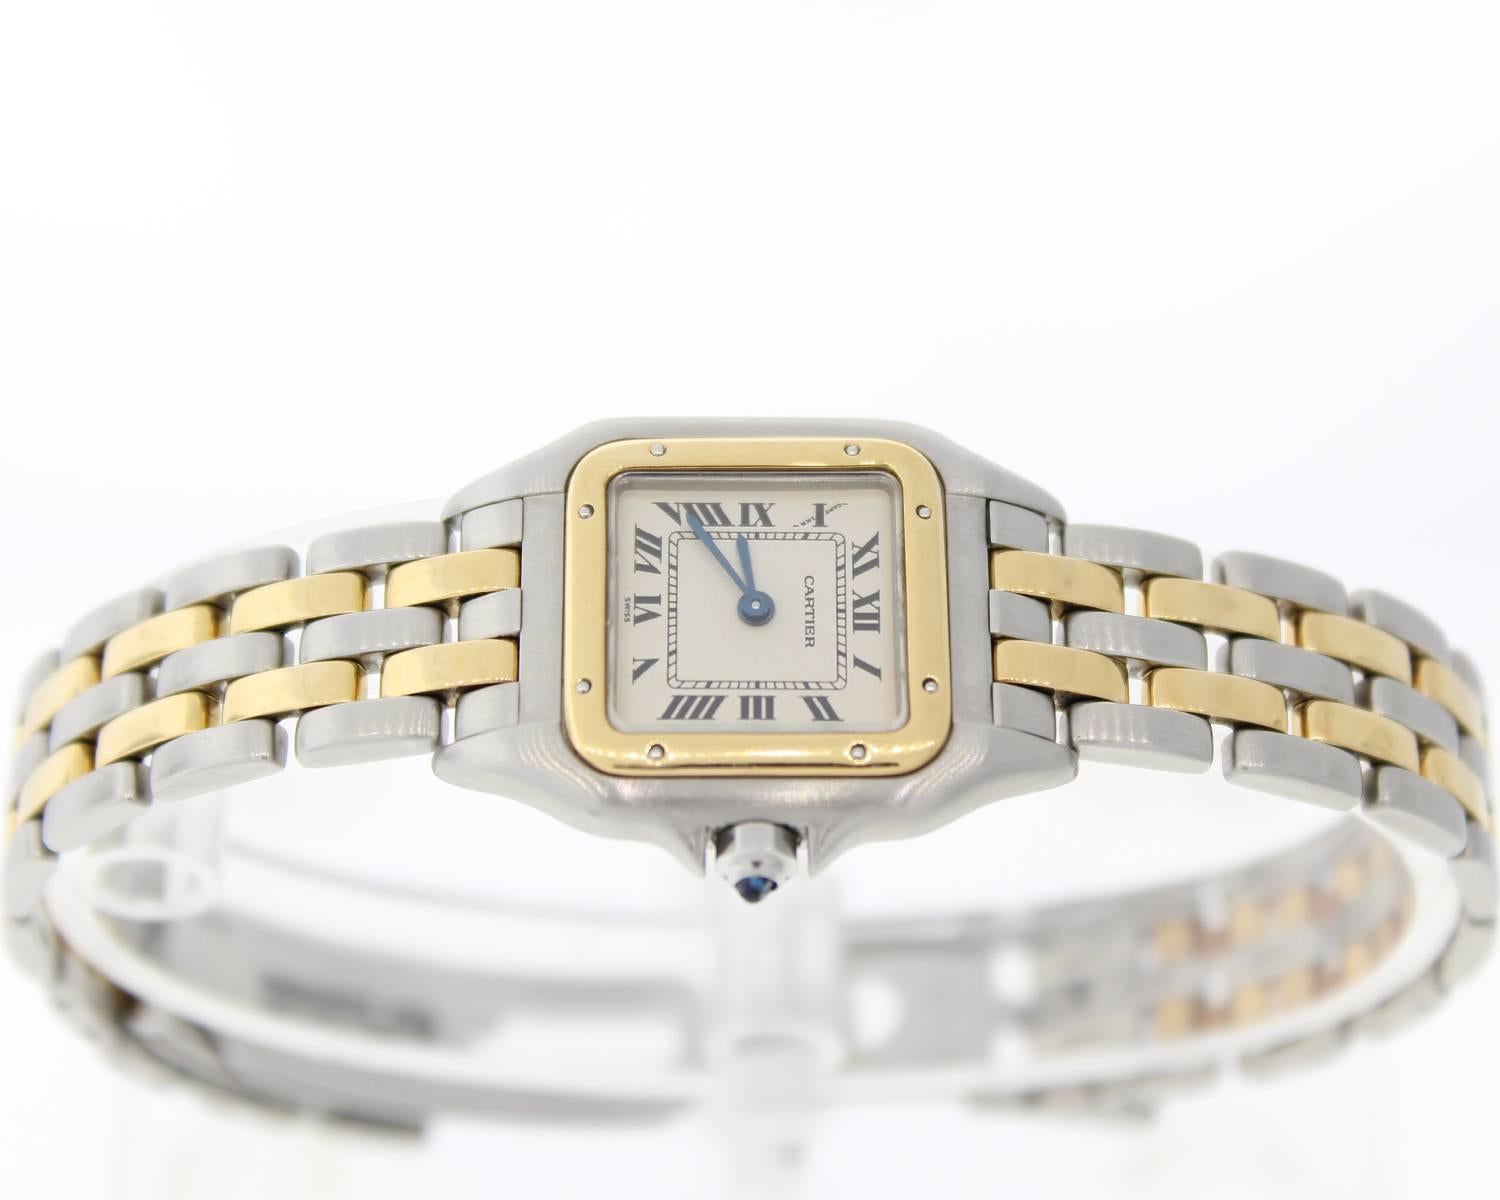 Brand Name: Cartier
Style Number: 30138
Style Name: Panthere
Color Name (Dial): Ivory Roman
Country of Manufacture: Switzerland
Gender: Womens
Strap Material: Stainless Steel/18K Yellow Gold
Case Metal: Stainless Steel/18K Yellow